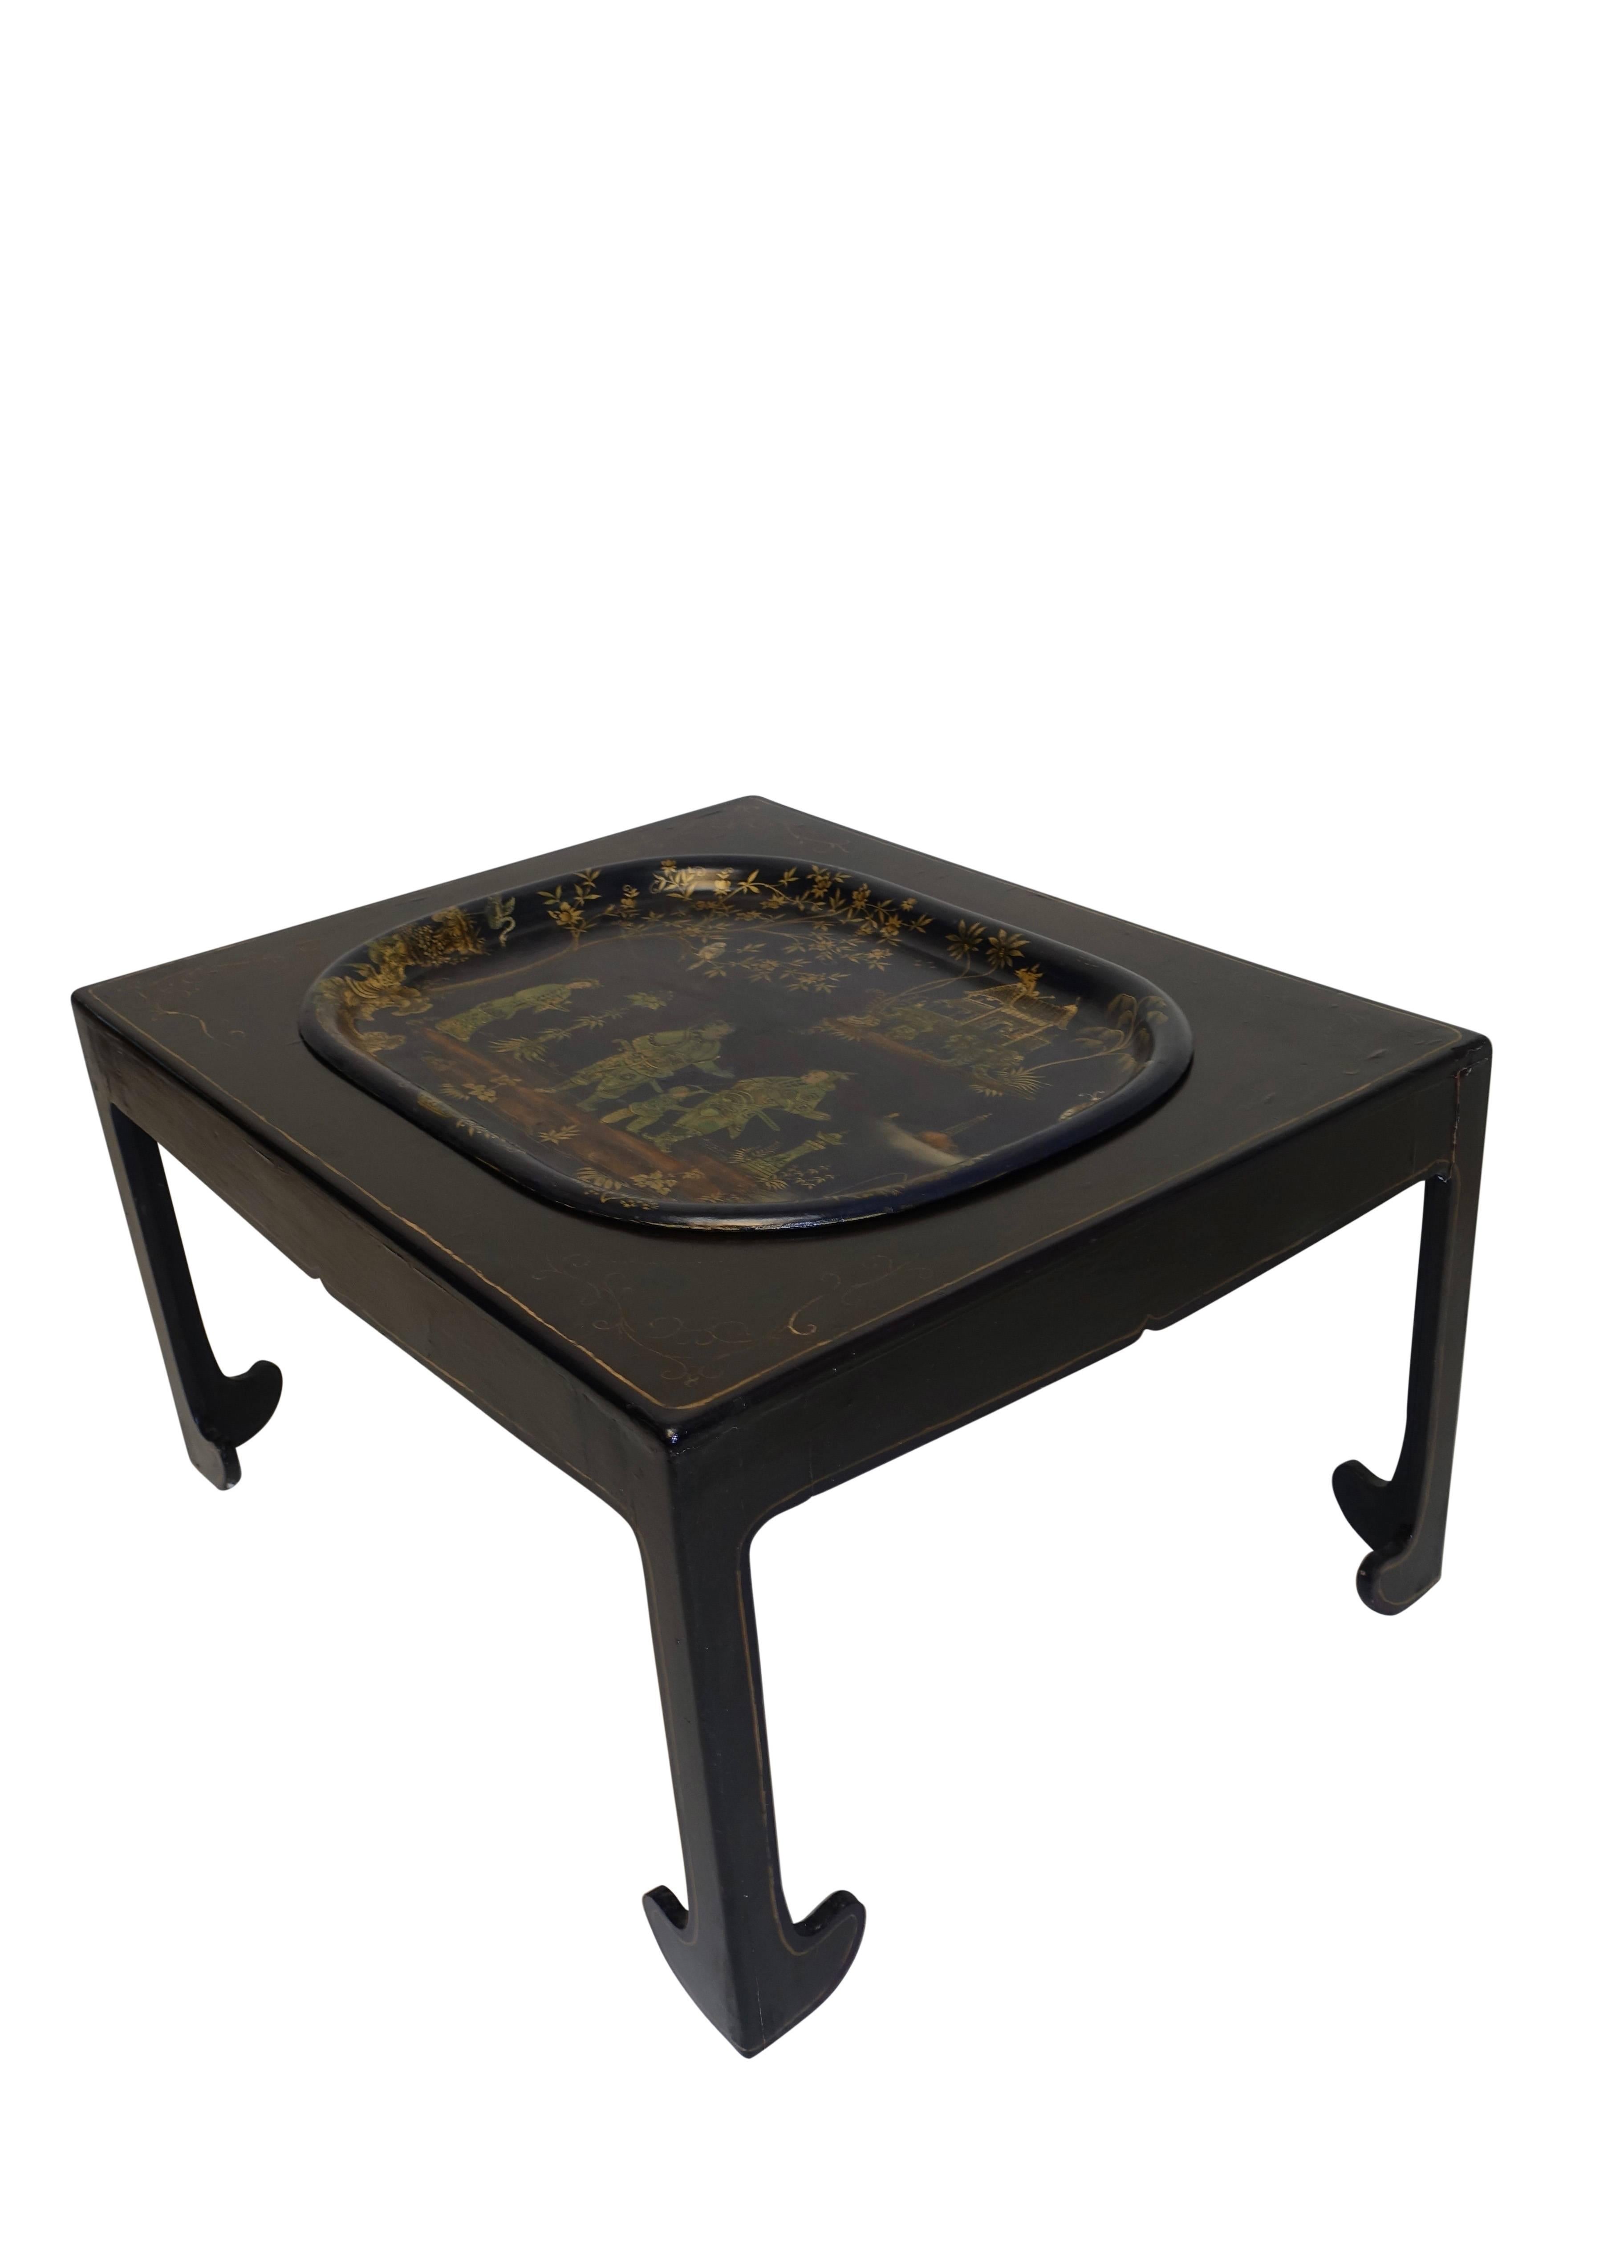 Navy Blue Tole Tray Table with Black Asian Style Stand, England, 19th Century 2